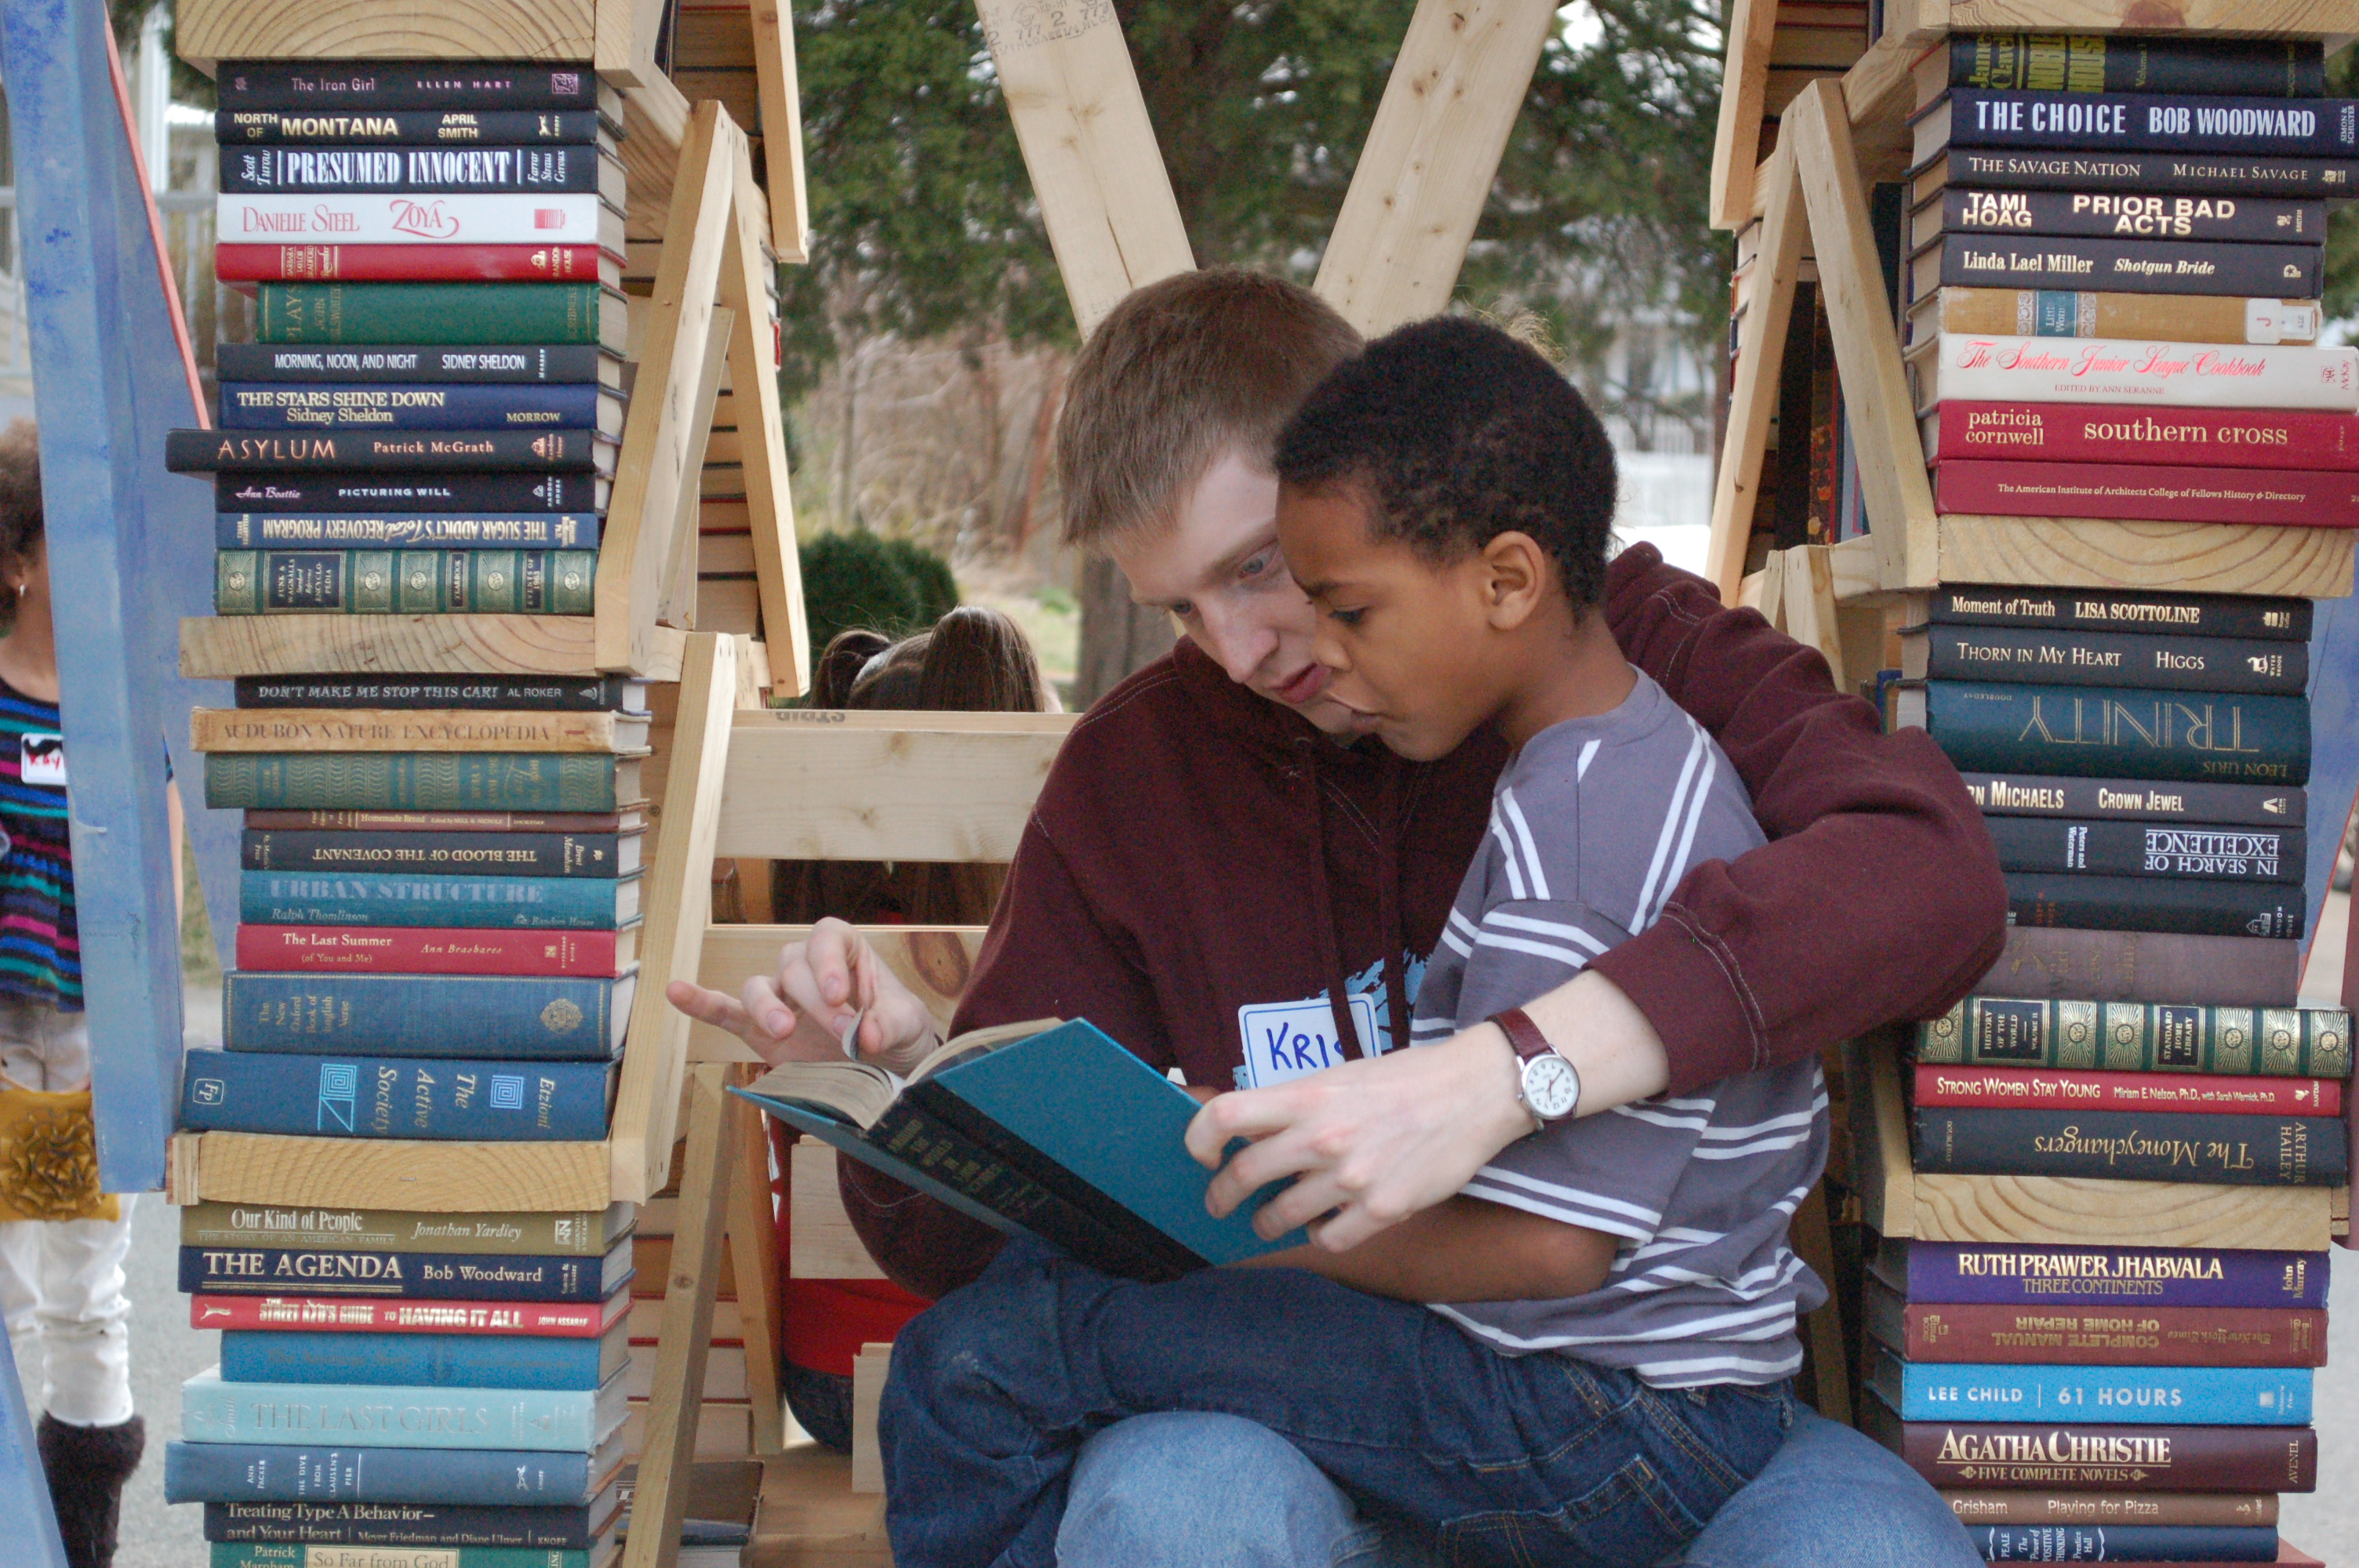 Man holds a little boy on his lap as they read a book together